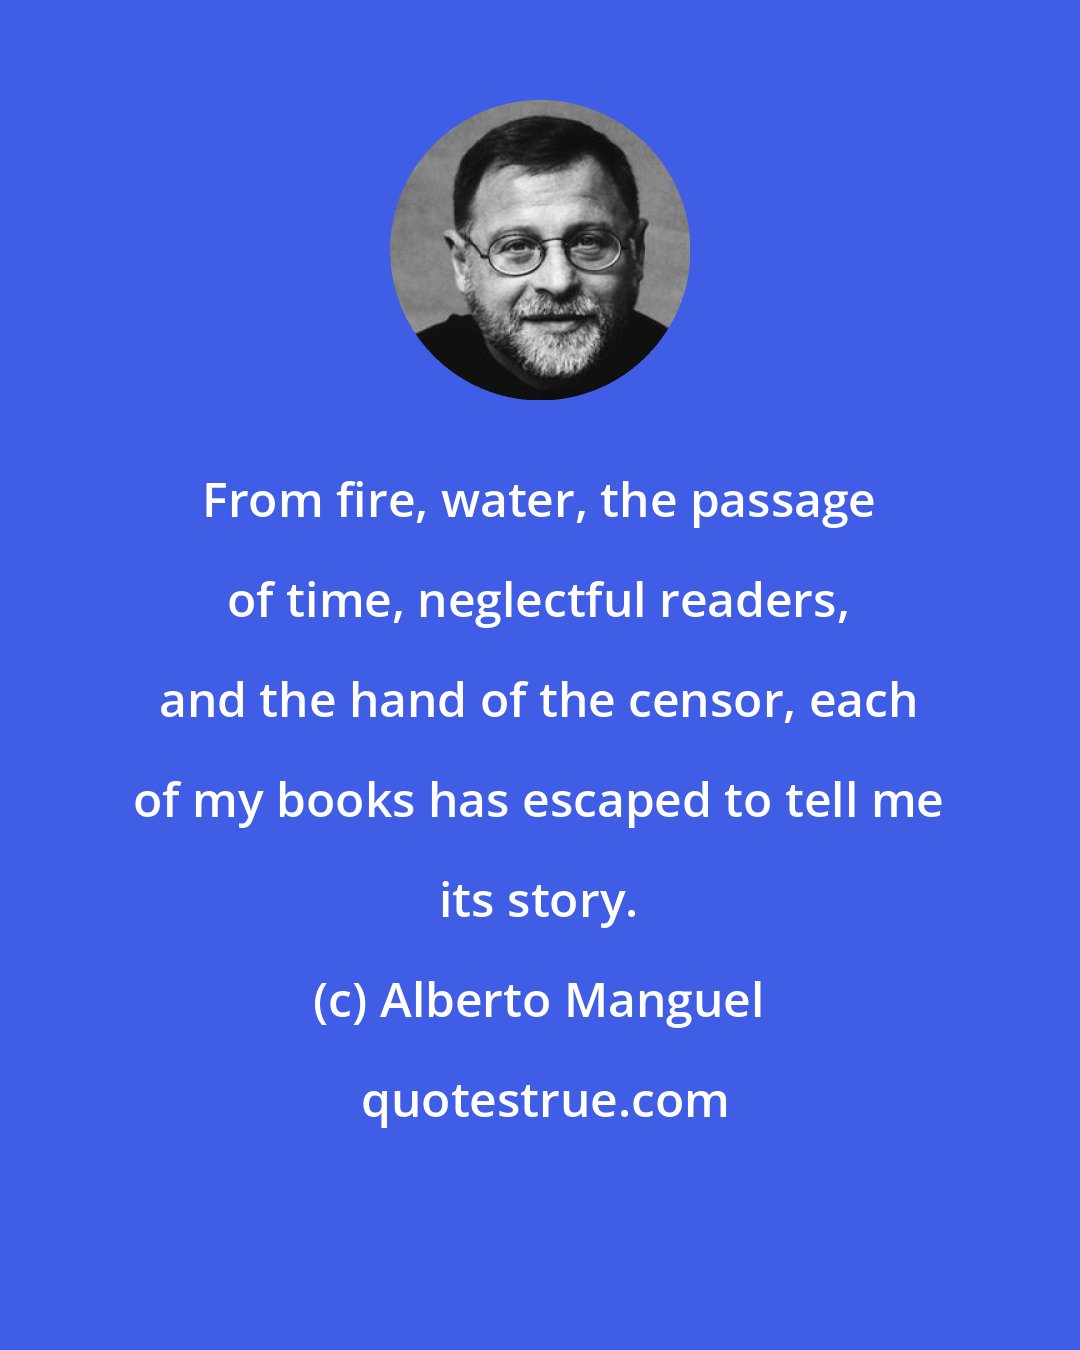 Alberto Manguel: From fire, water, the passage of time, neglectful readers, and the hand of the censor, each of my books has escaped to tell me its story.